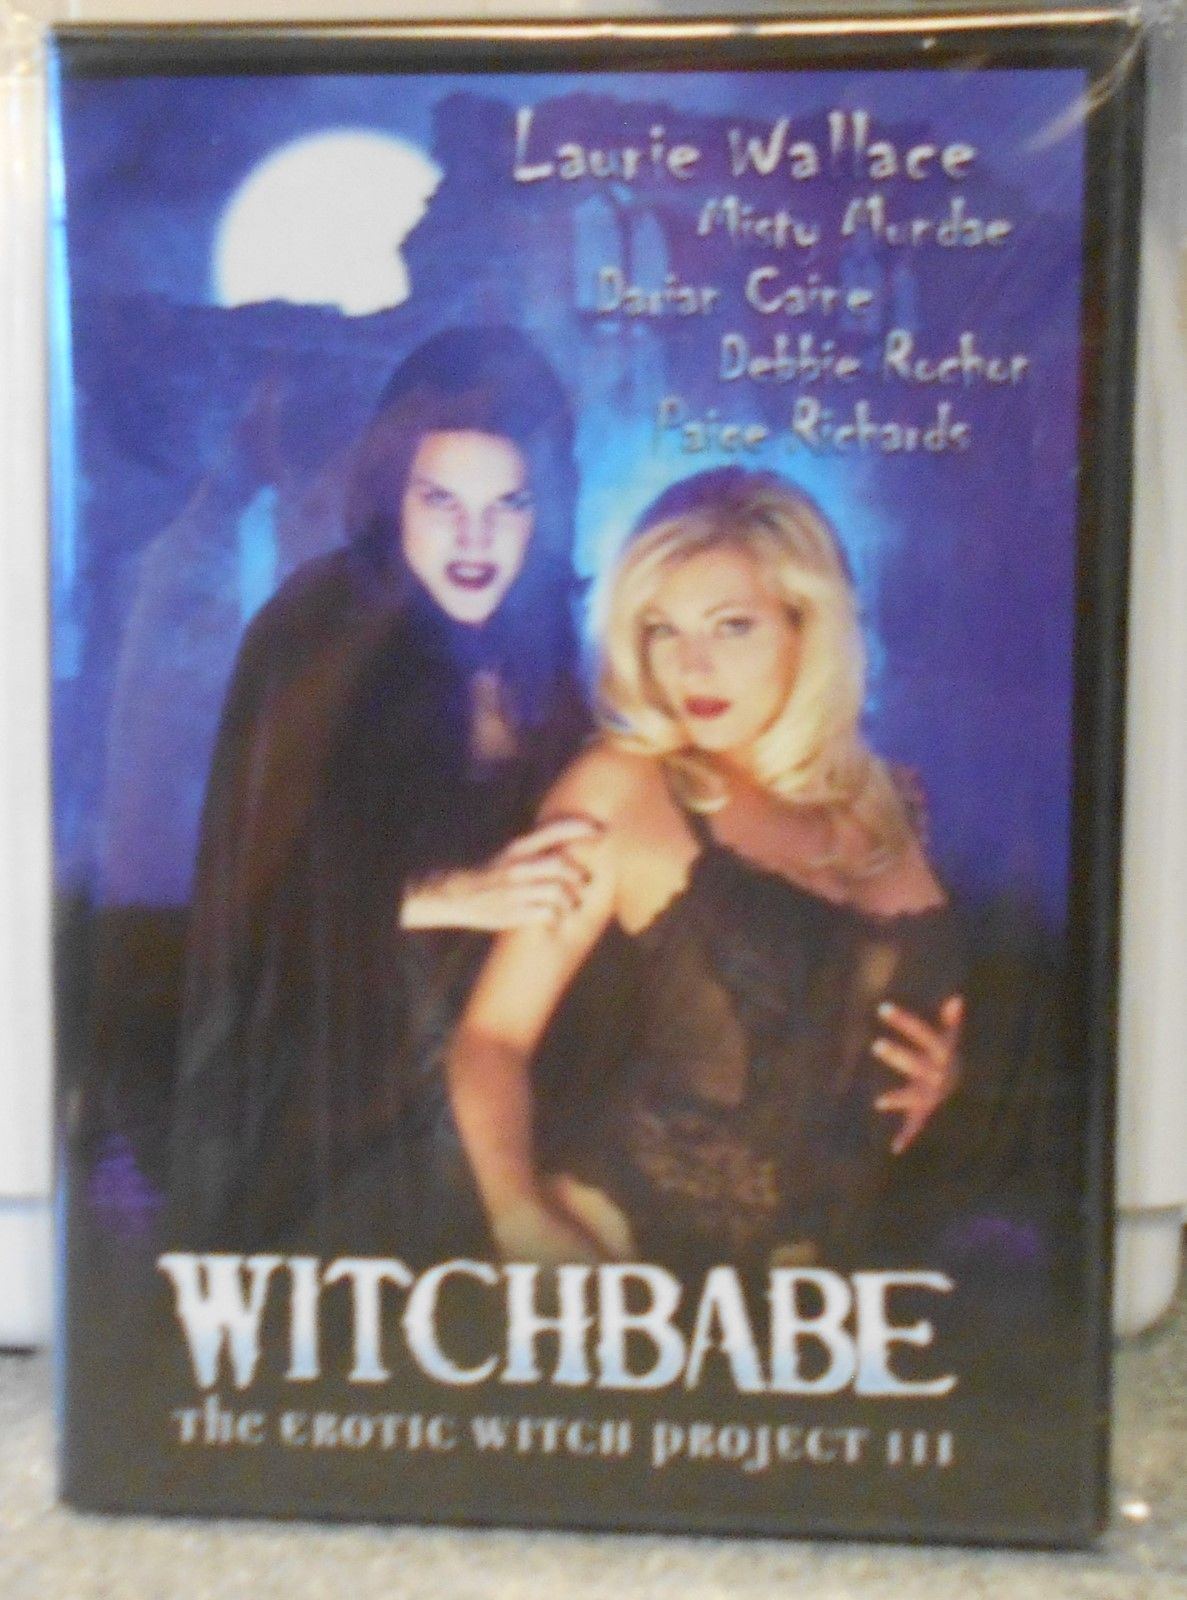 Erotic witch project dvd Top rated compilations website. photo